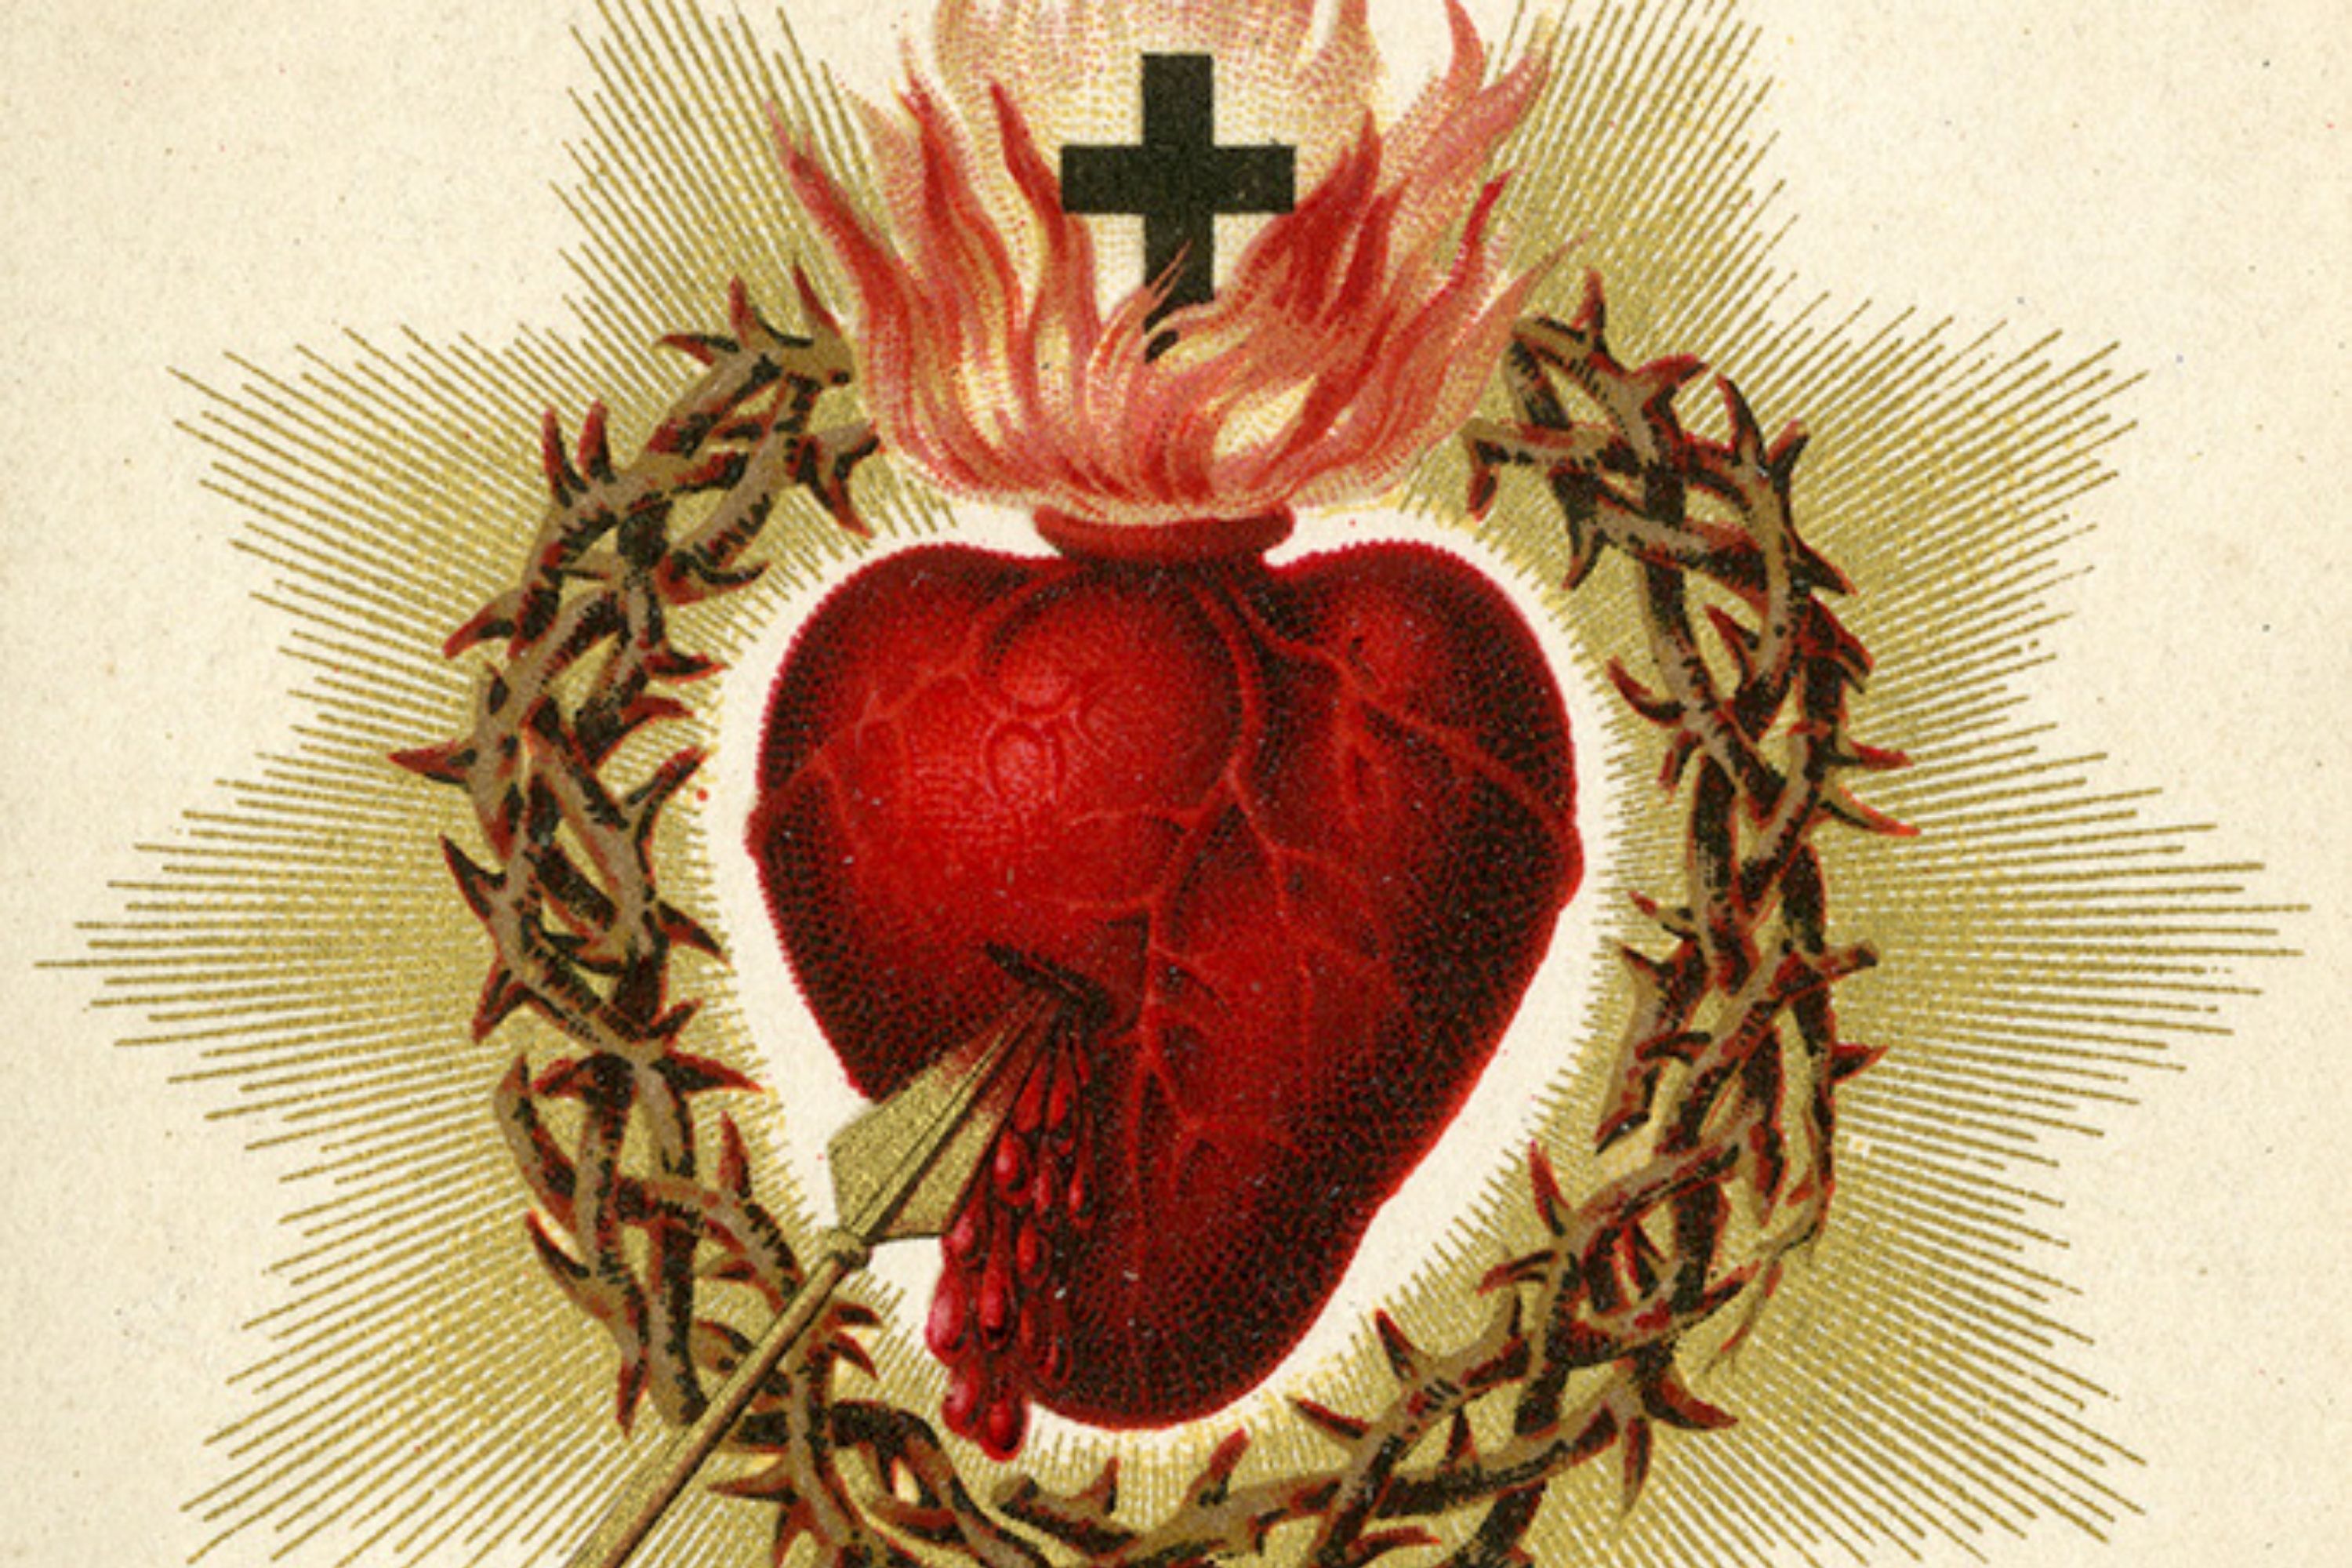 feast-of-the-sacred-heart-clearance-store-save-69-jlcatj-gob-mx